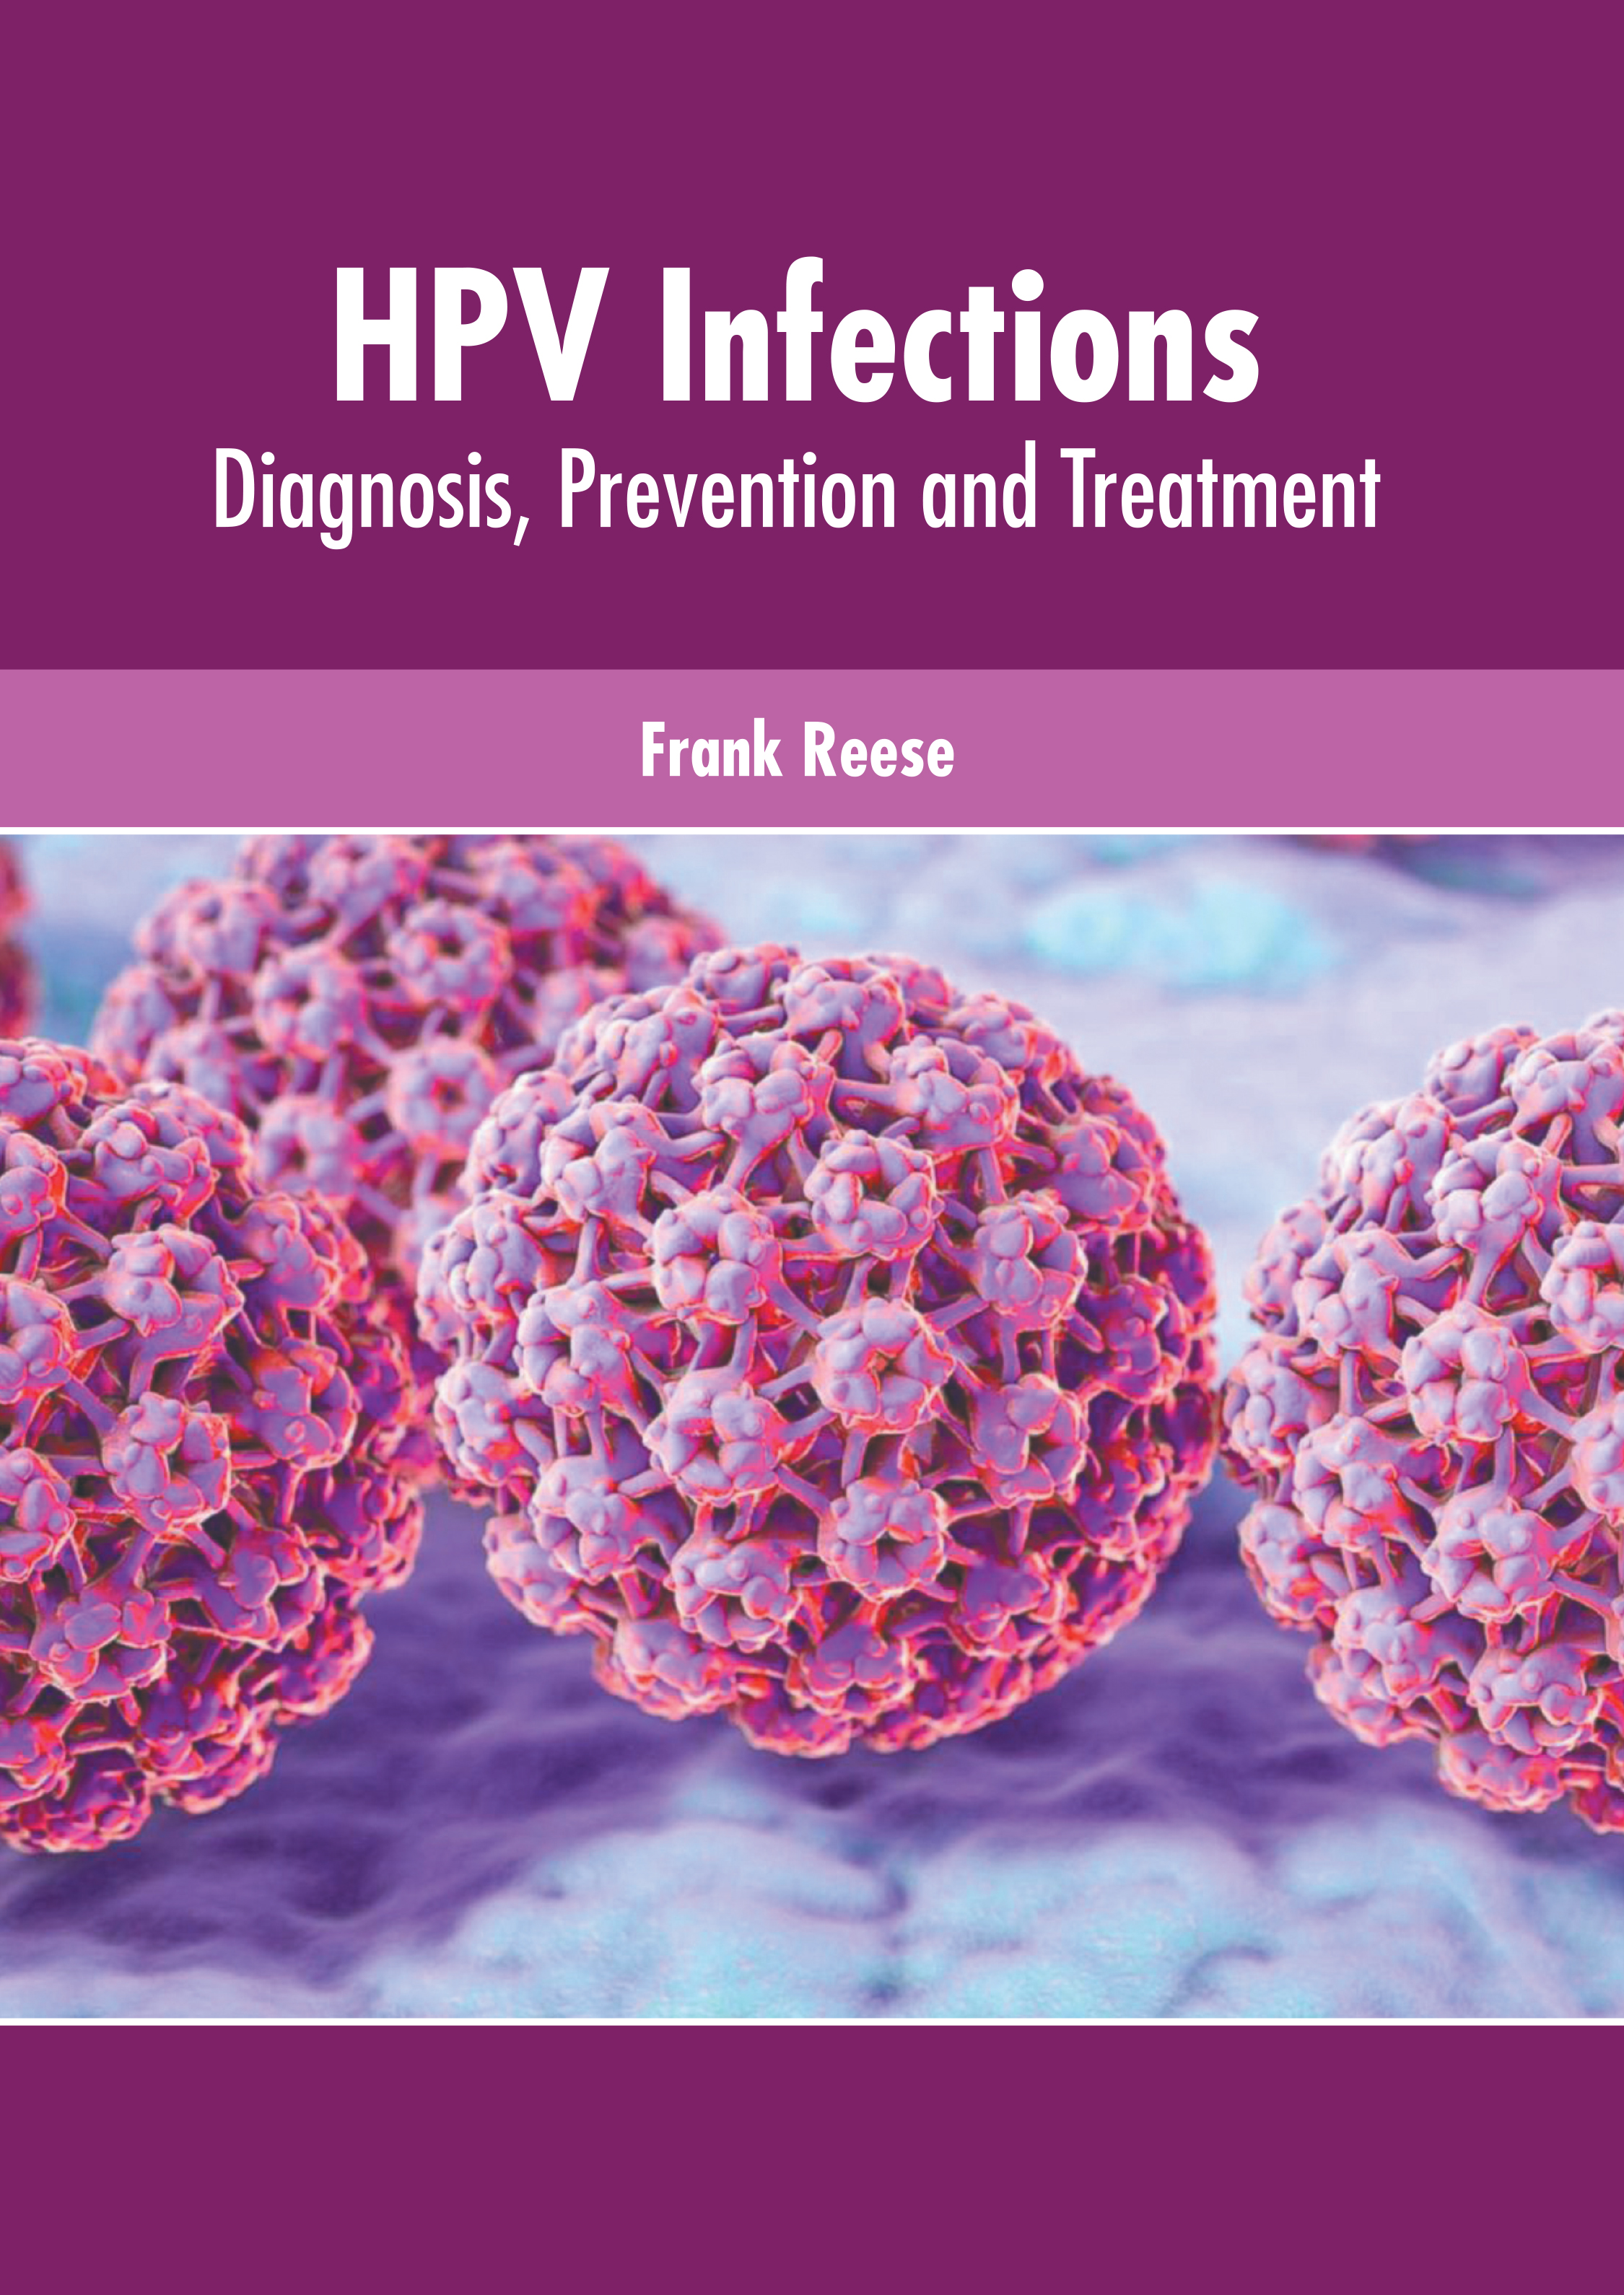 HPV INFECTIONS: DIAGNOSIS, PREVENTION AND TREATMENT- ISBN: 9781639272228